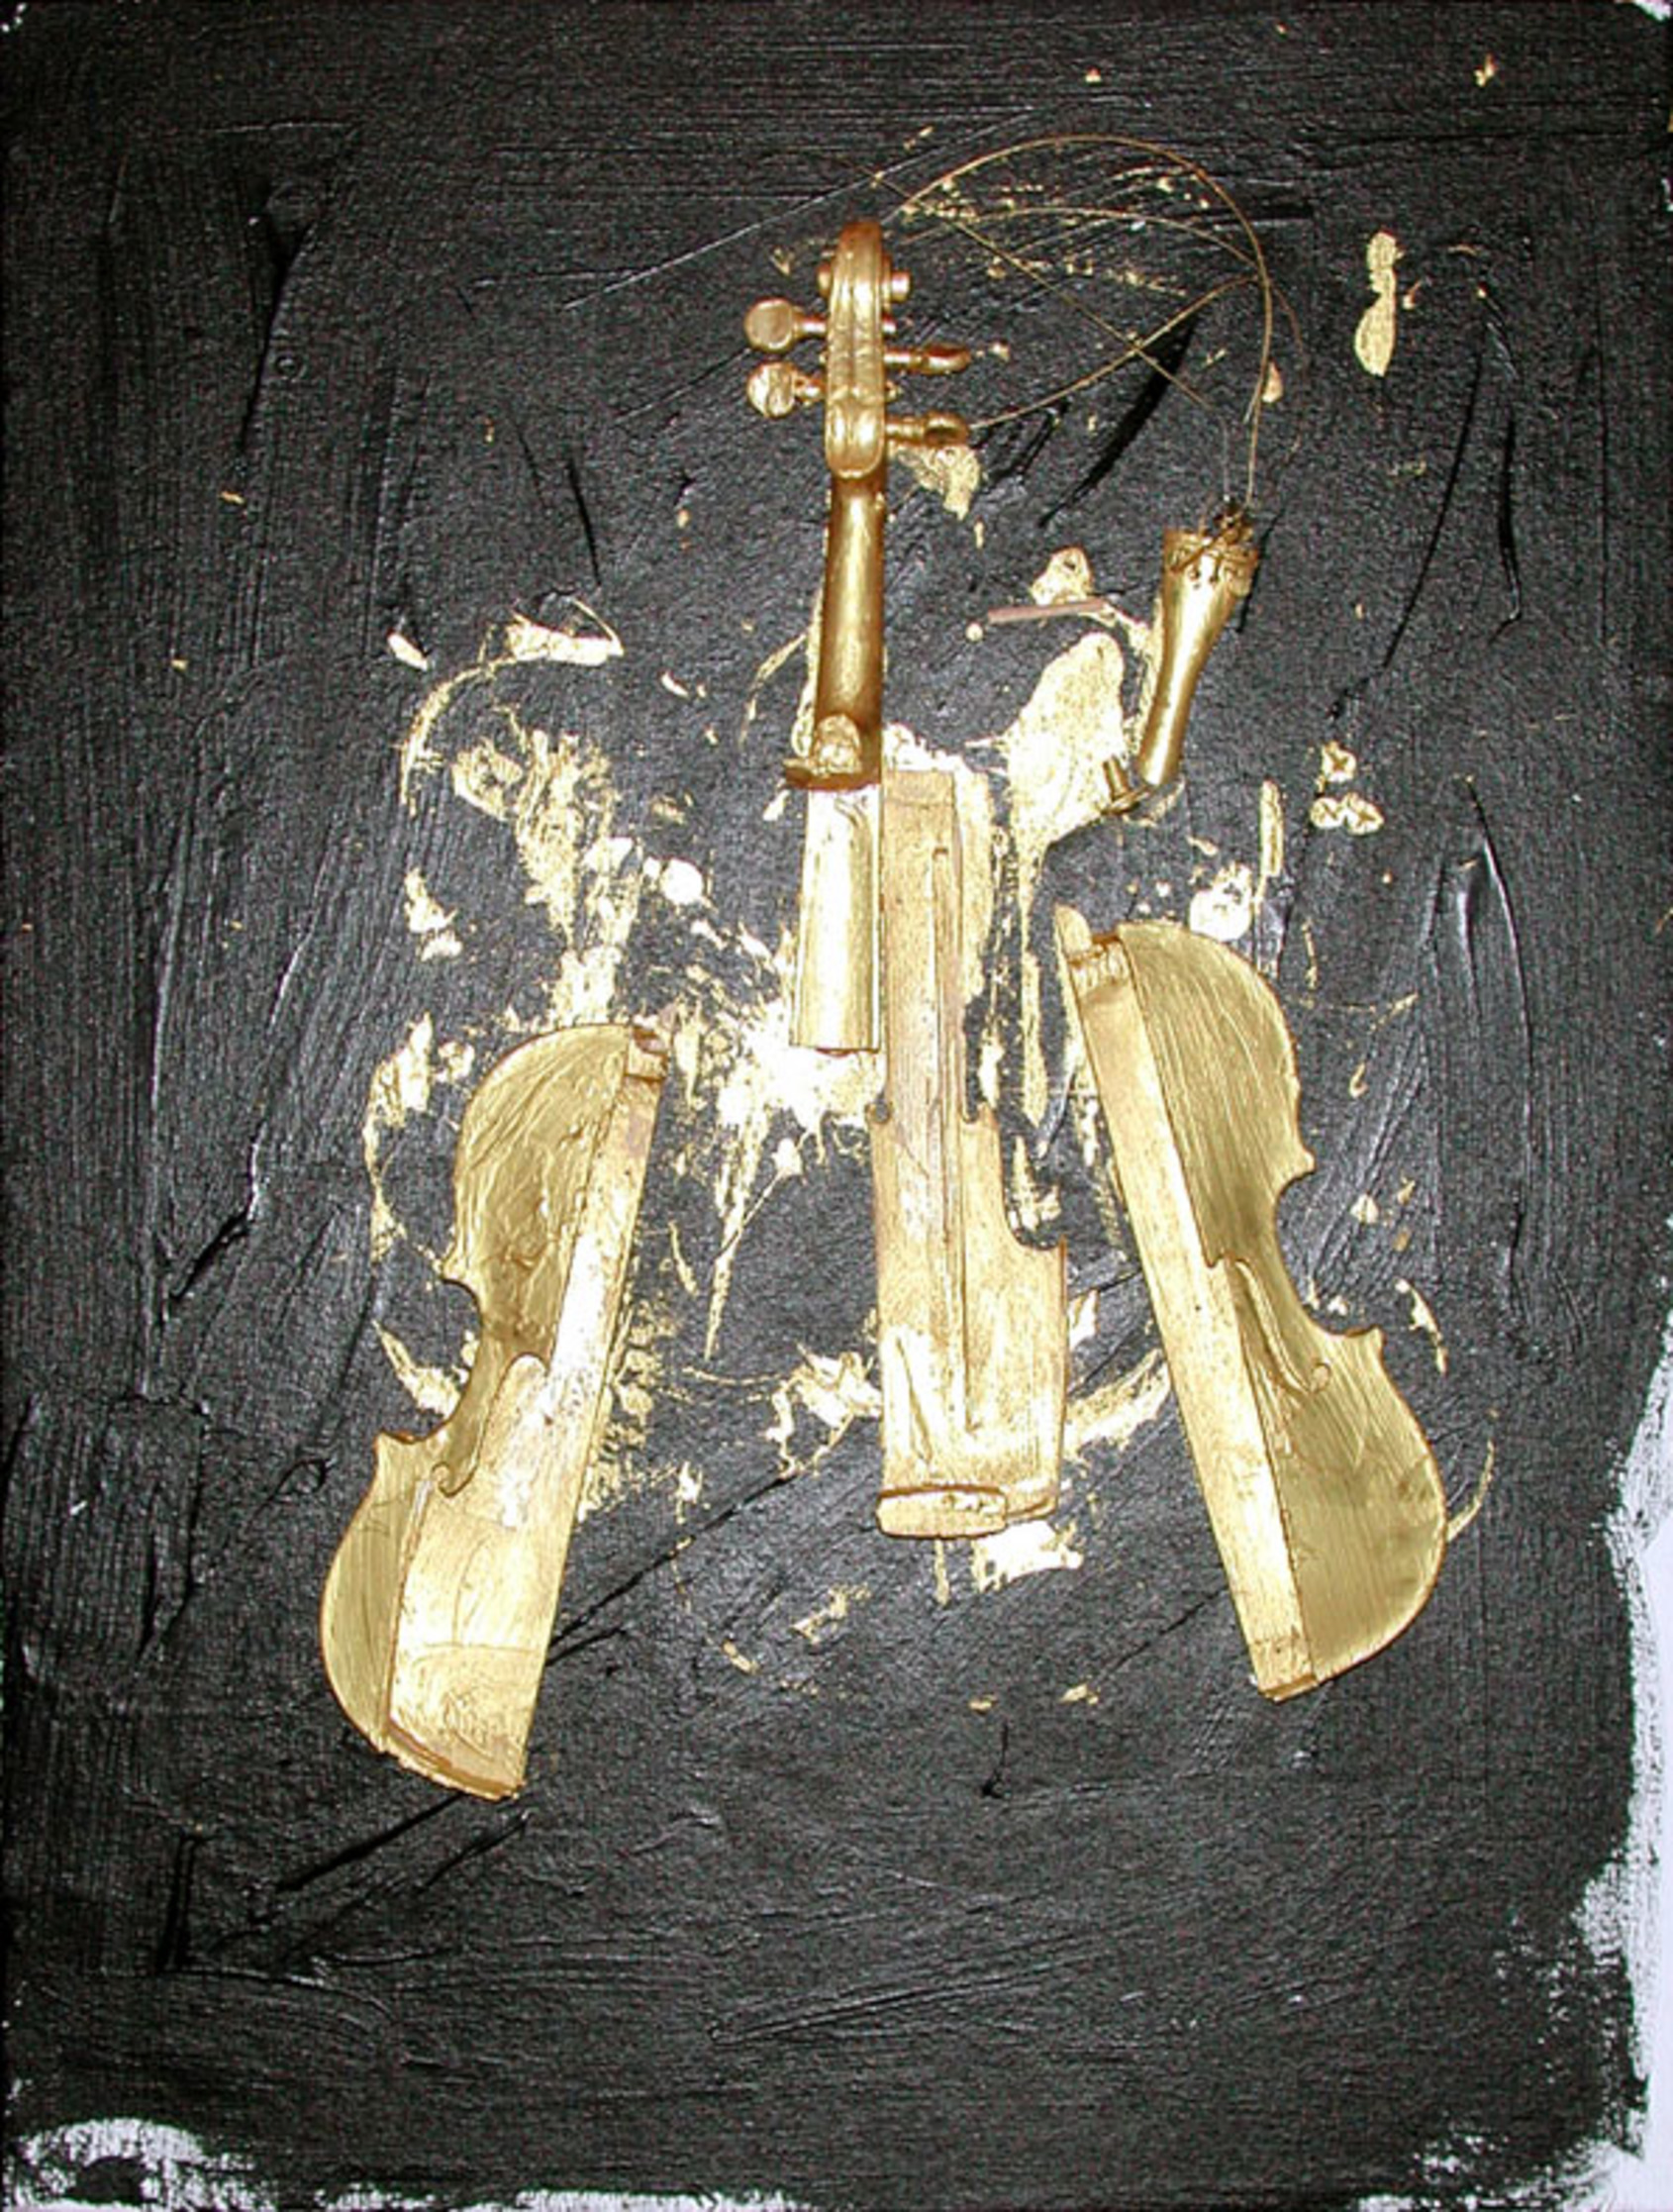 Untitled, Arman, 2004, 81.3 x 61 x 8.9  cm. Smashed violin with gold acrylic paint on black canvas . Courtesy of The Arman Marital Trust. 